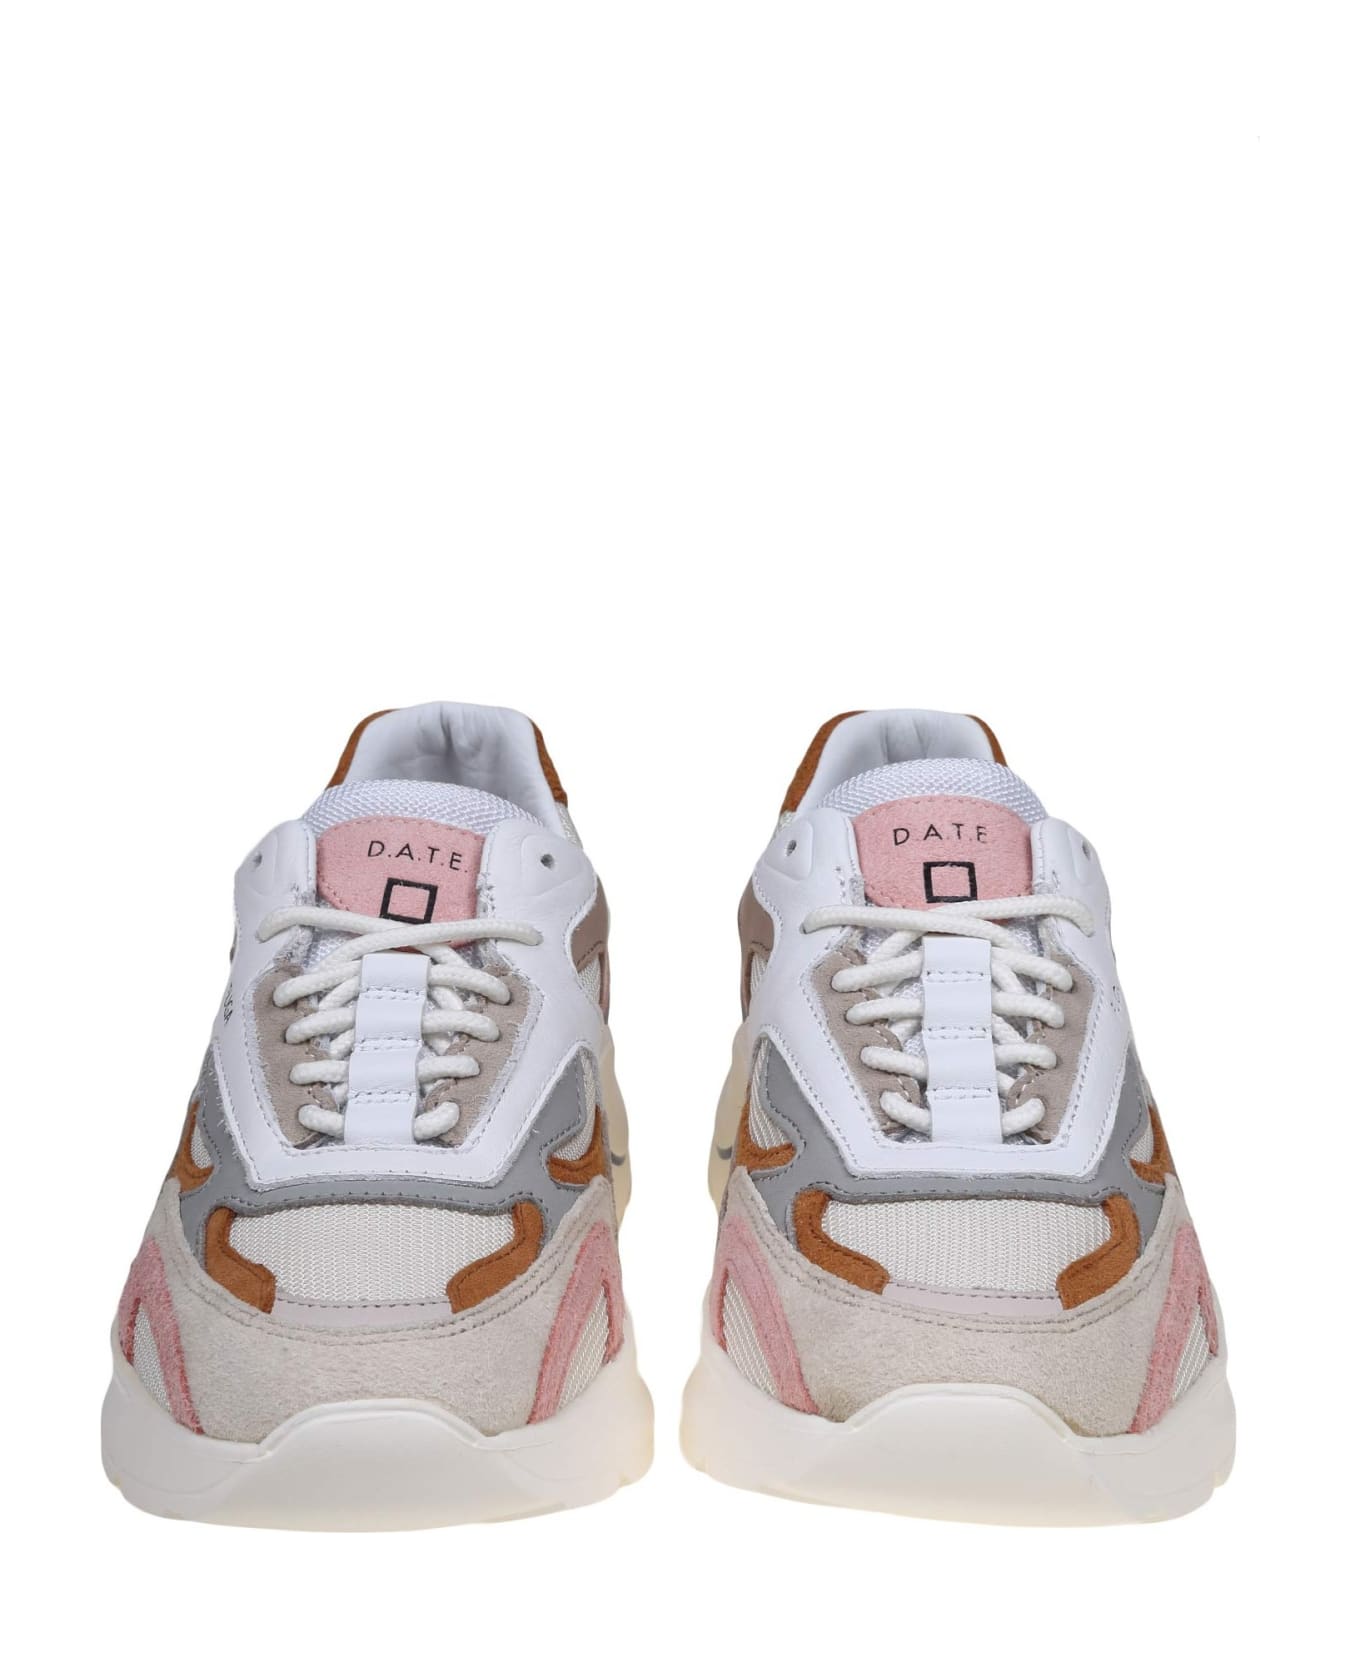 D.A.T.E. Fuga Sneakers In White/ Cream Leather And Suede - Cream